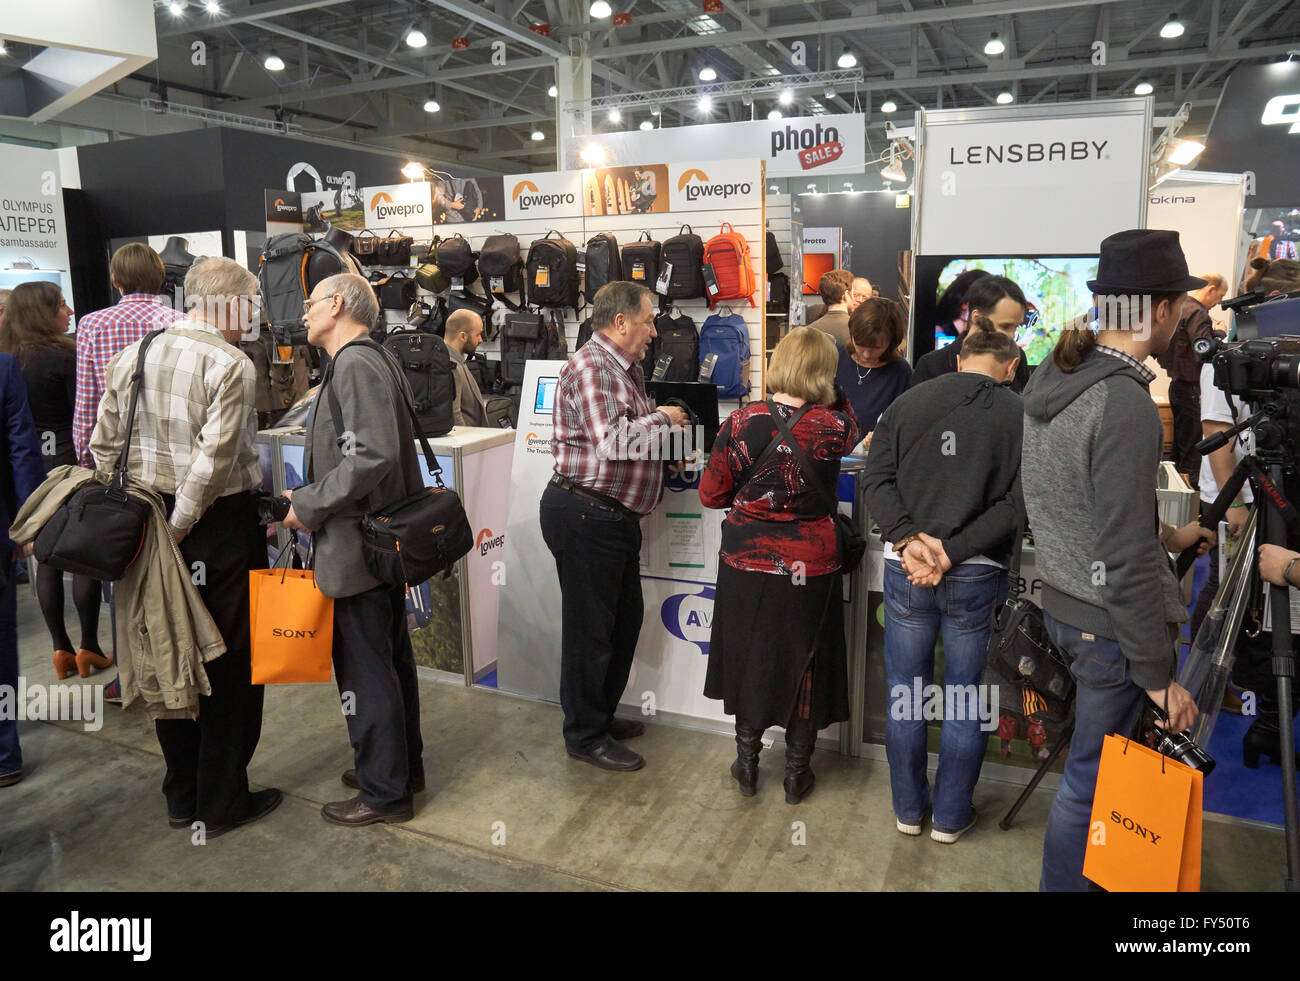 Moscow Crocus Expo, Moscow, Russia - April 15, 2016: Visitors trying bags at Photo Sale stand at Photoforum 2016 Stock Photo